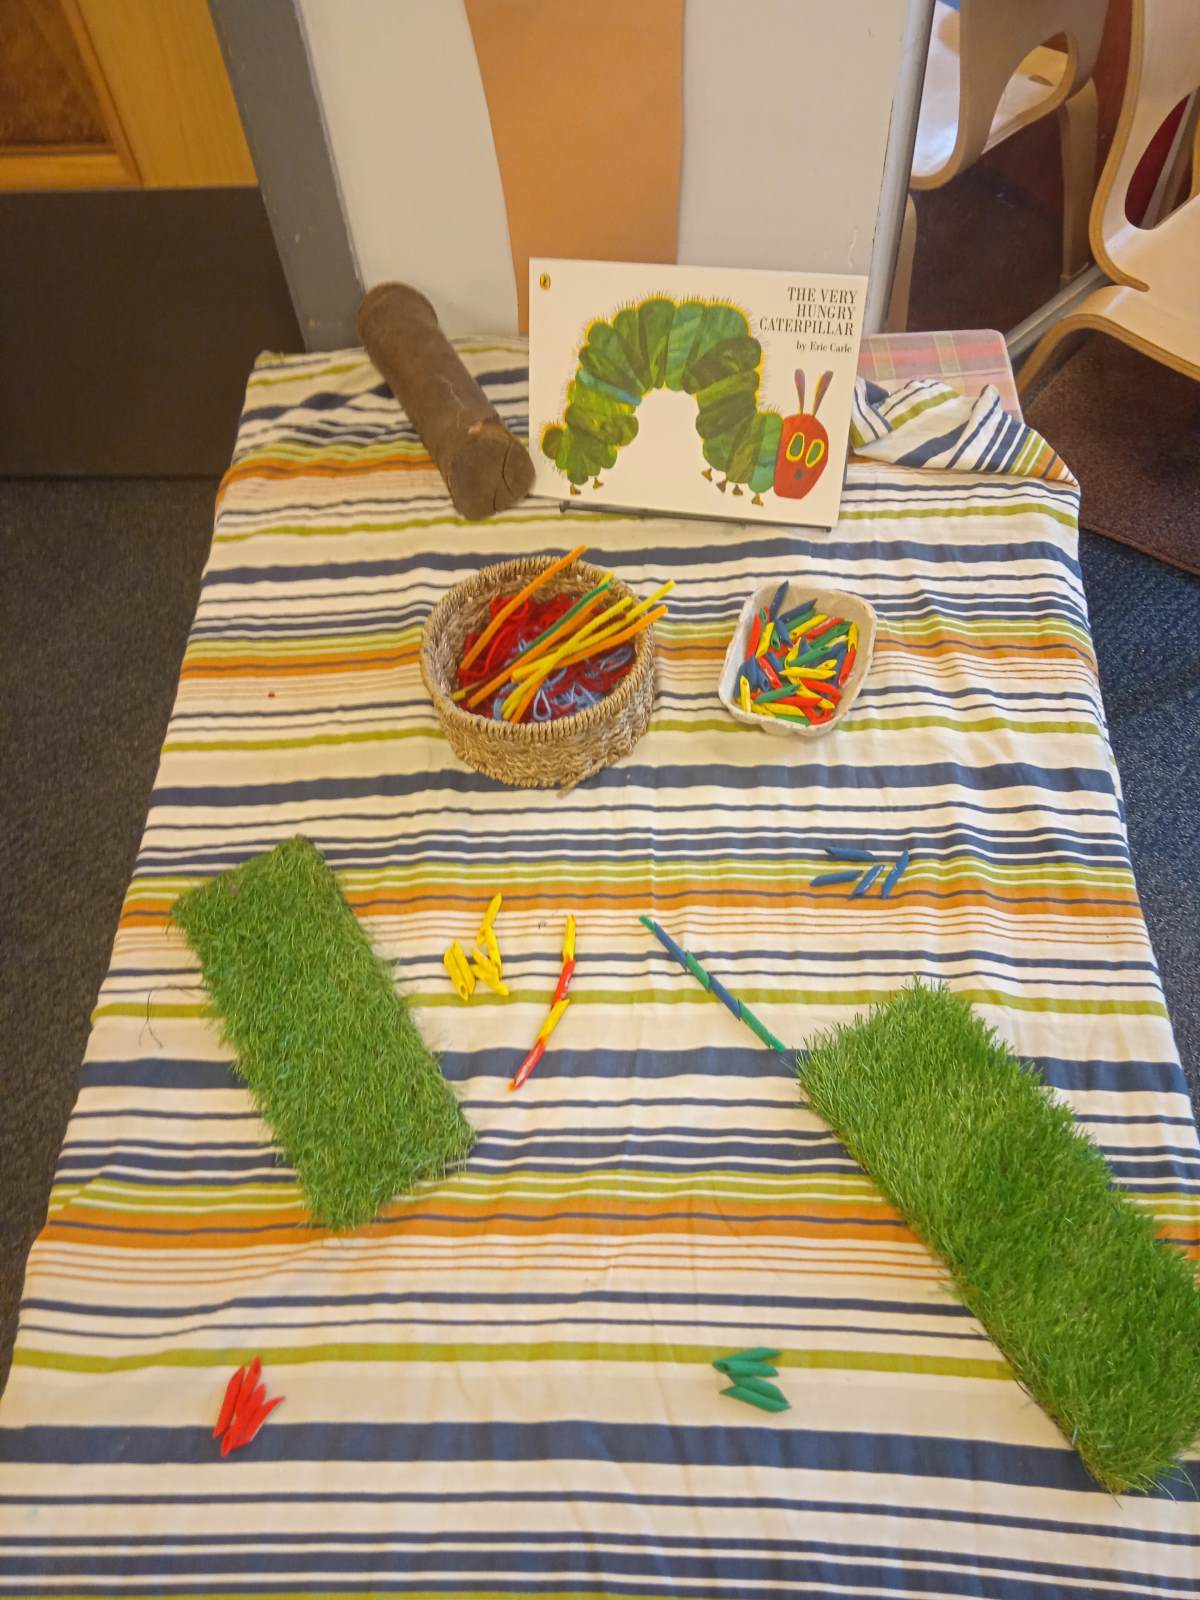 Coloured pasta and pipe cleaners